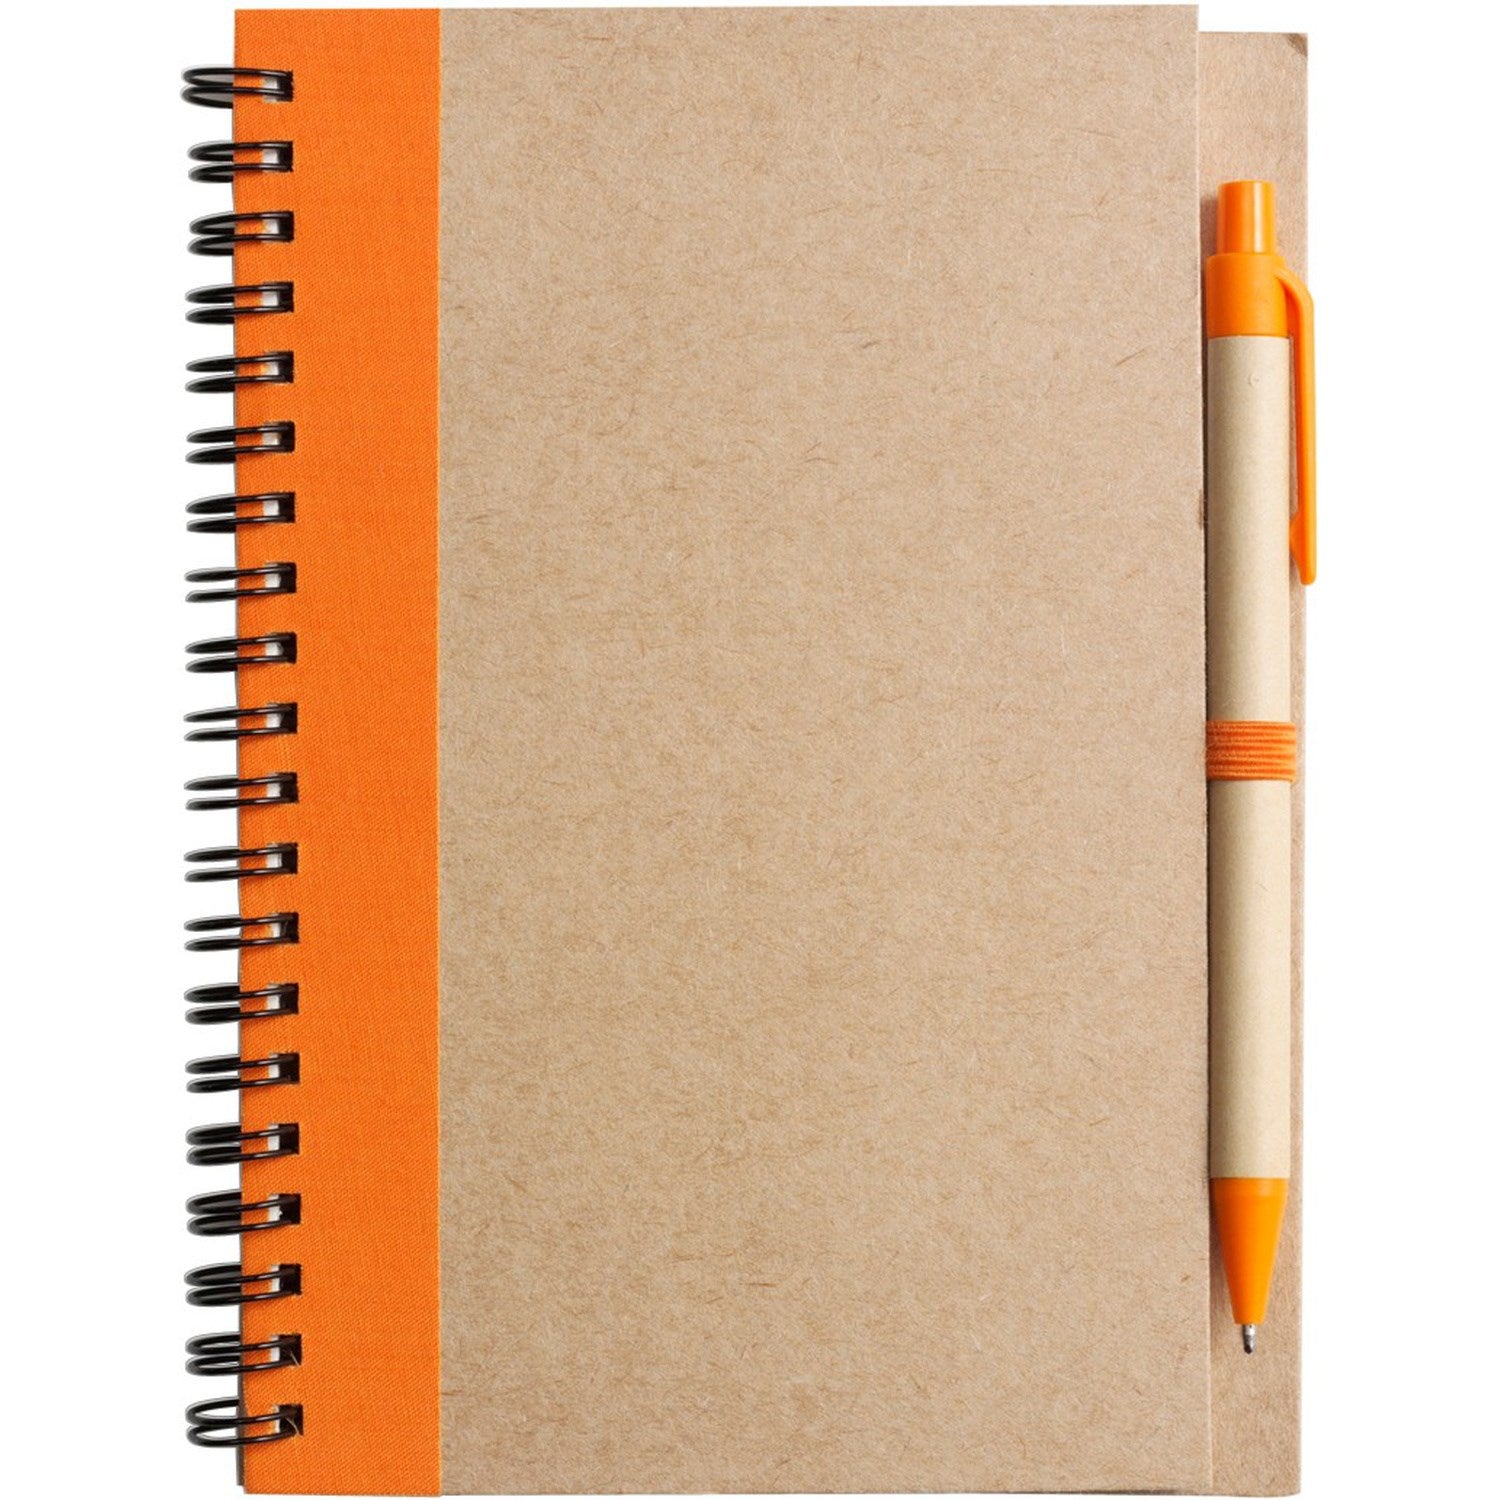 Cardboard Branded Notebook With Pen